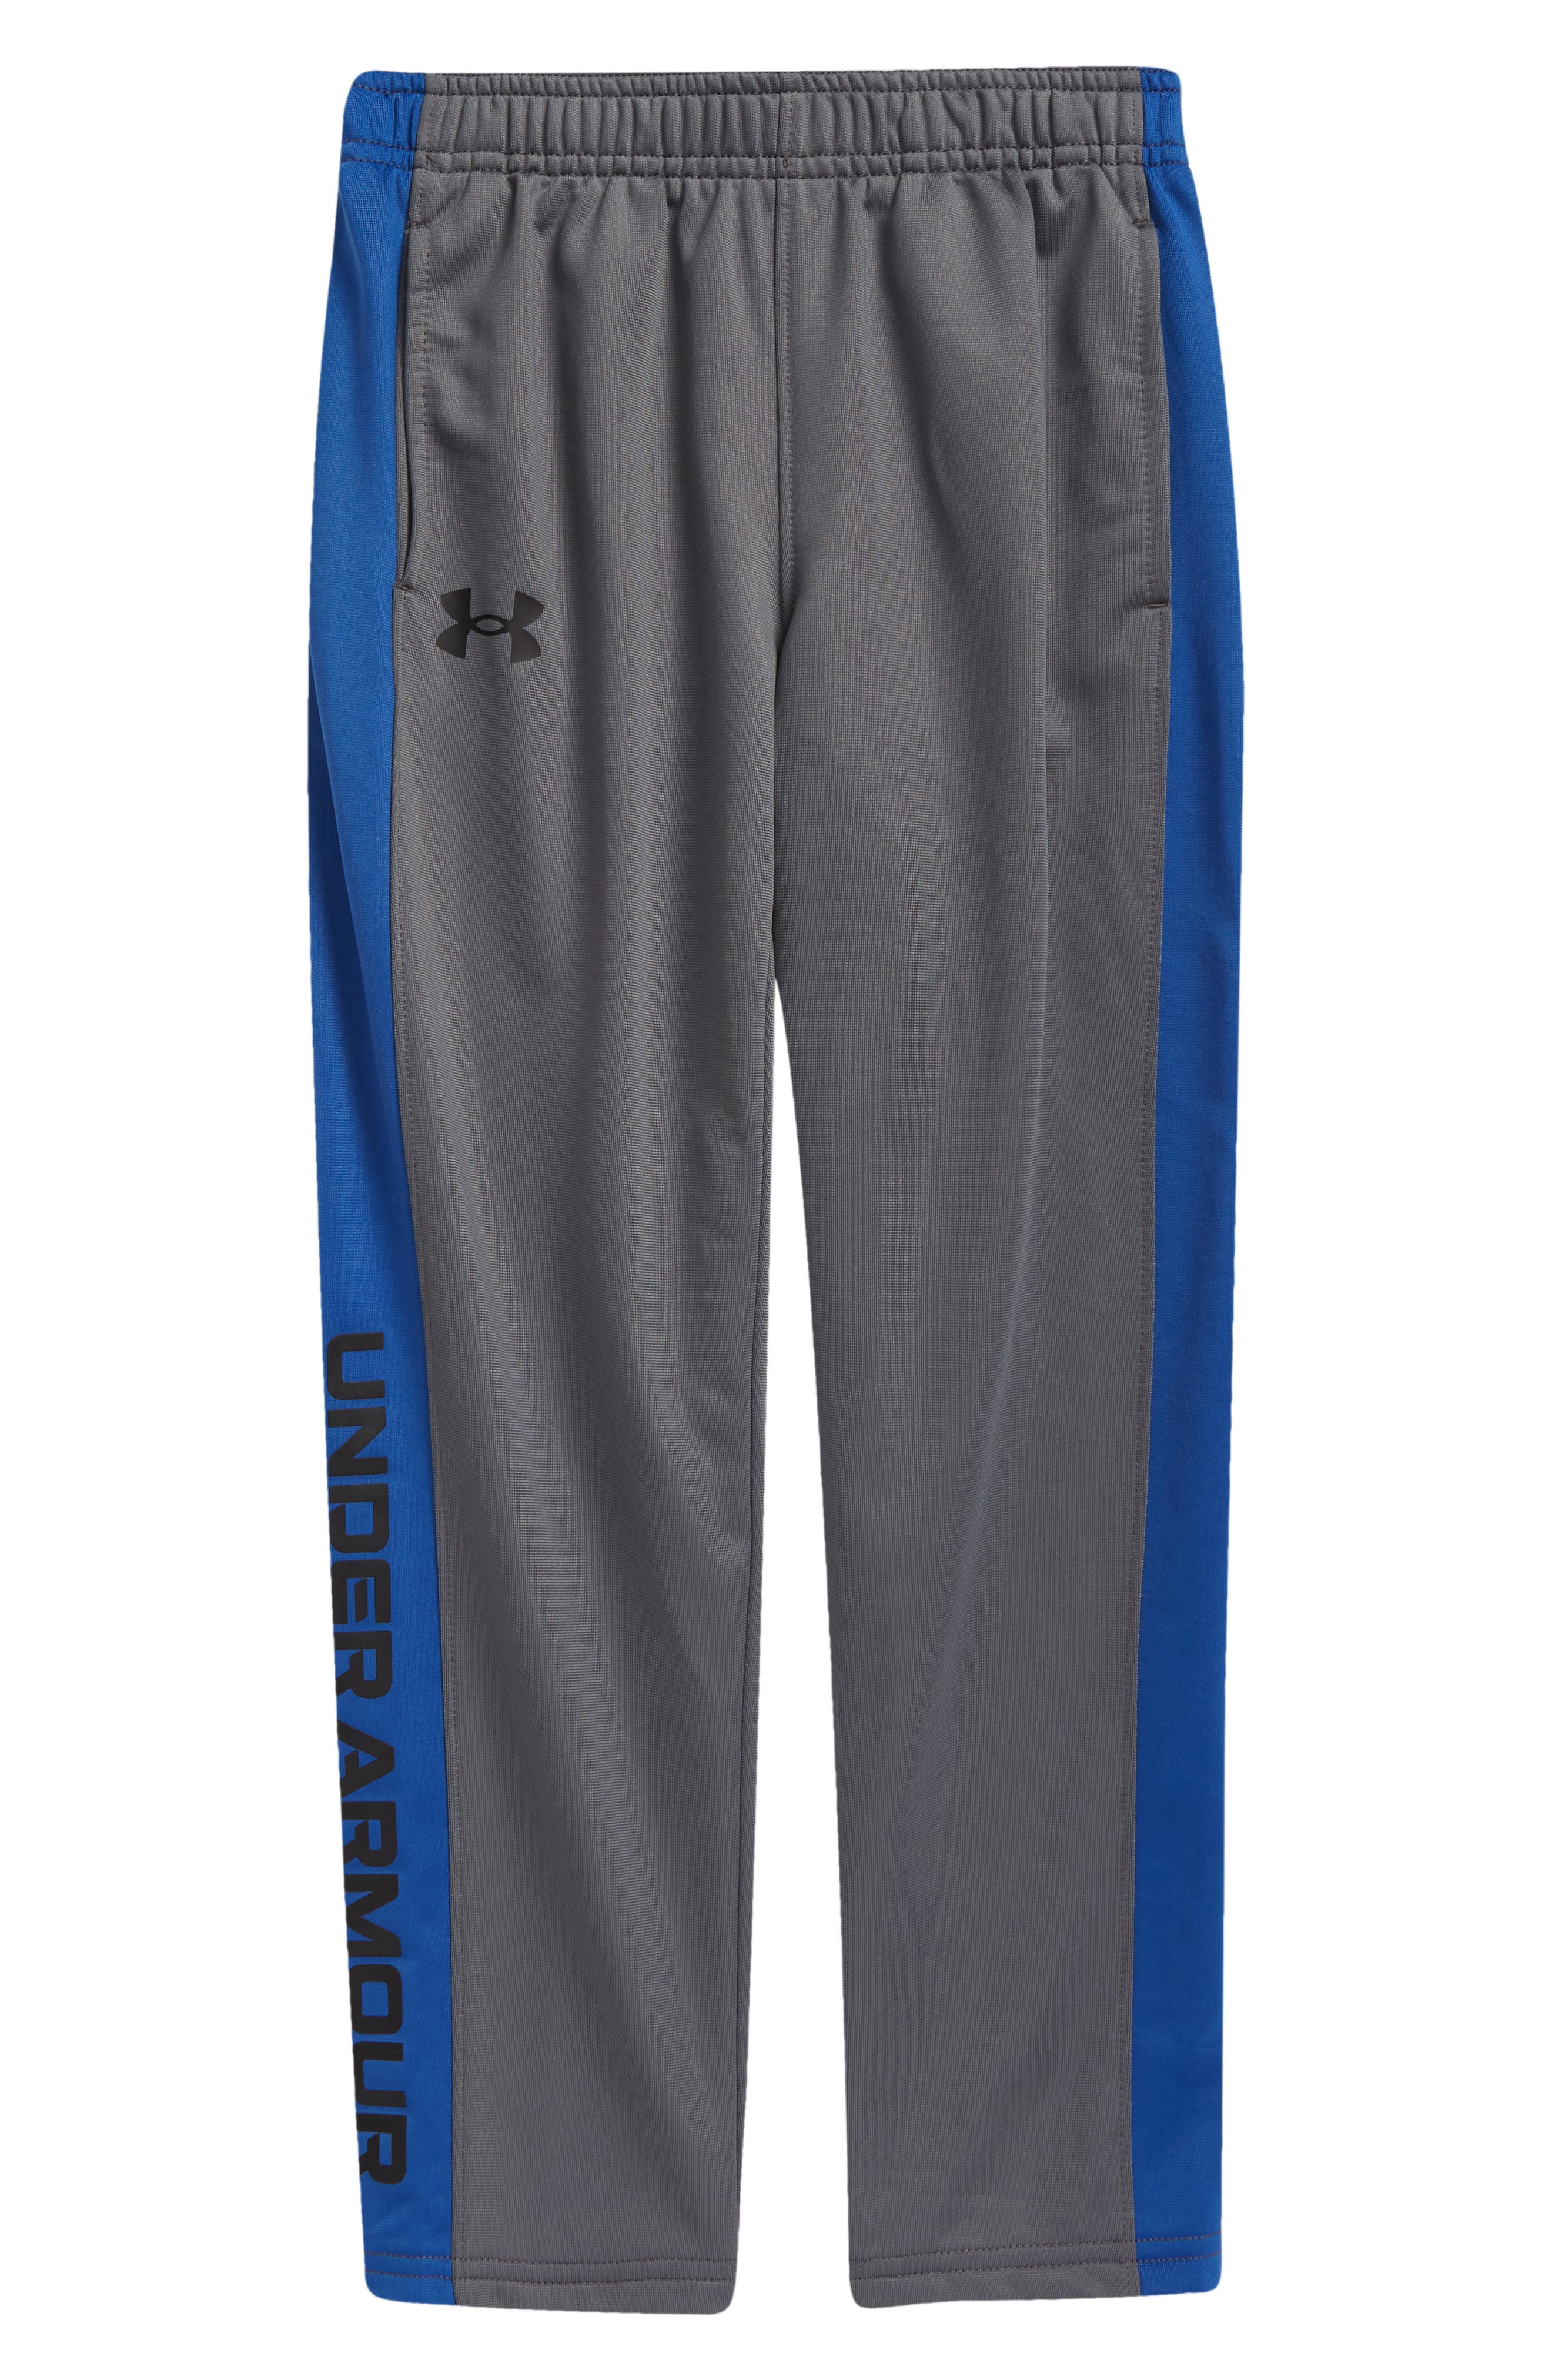 under armor youth pants